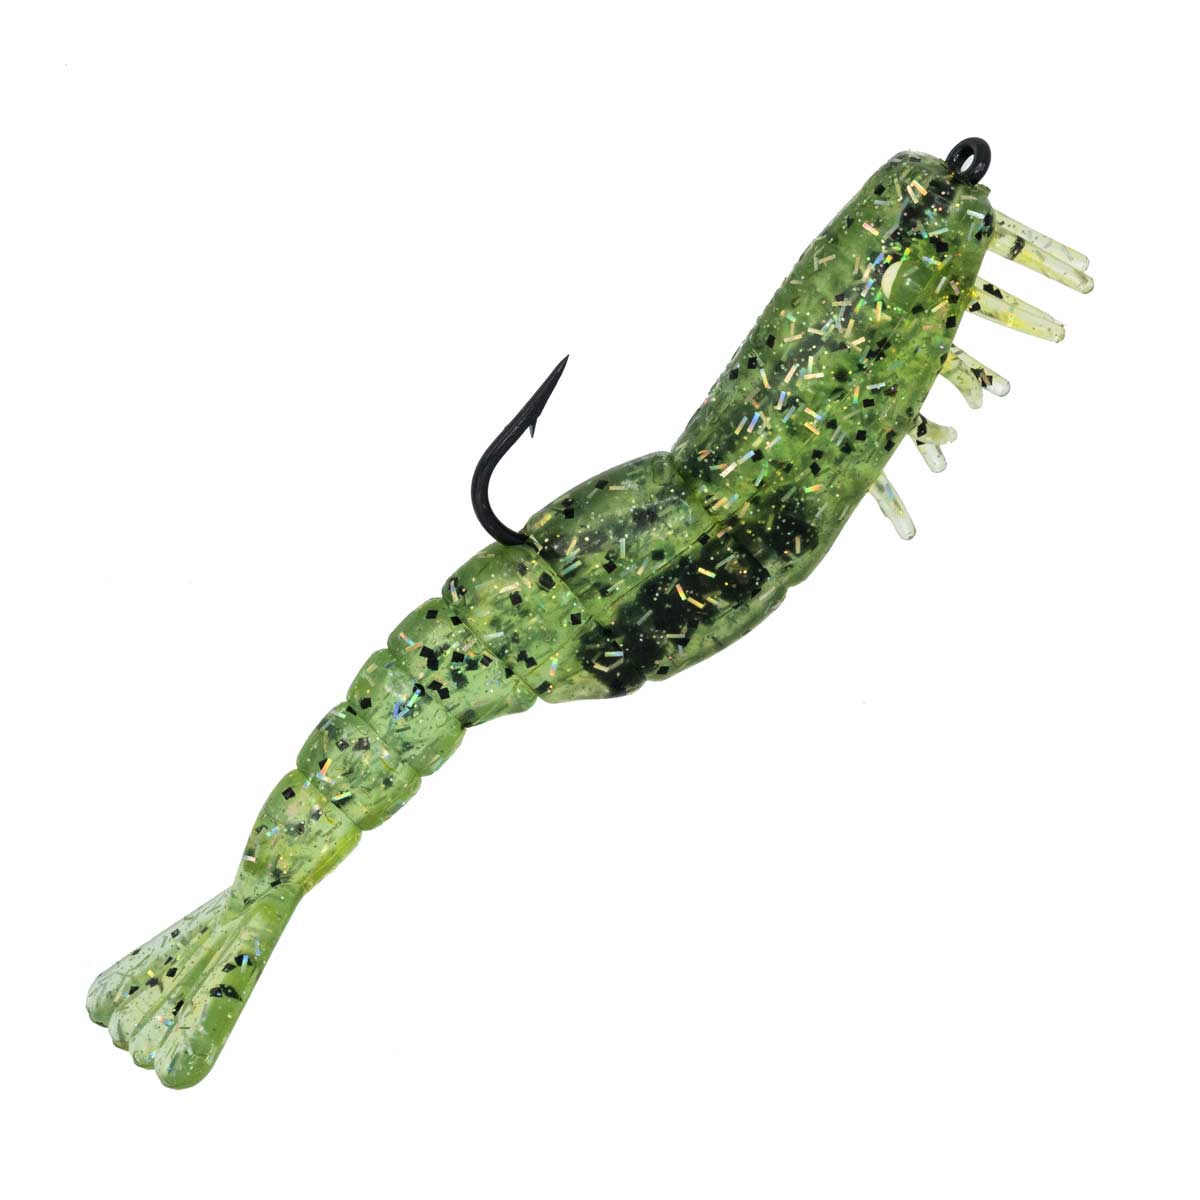 25 PCS. GLOW IN THE DARK SOFT SILICONE SHRIMP LURE BAITS, 5cm. 5 COLORS 5  EACH for Toothy Critters, Rigging Baits and Lures for Saltwater 